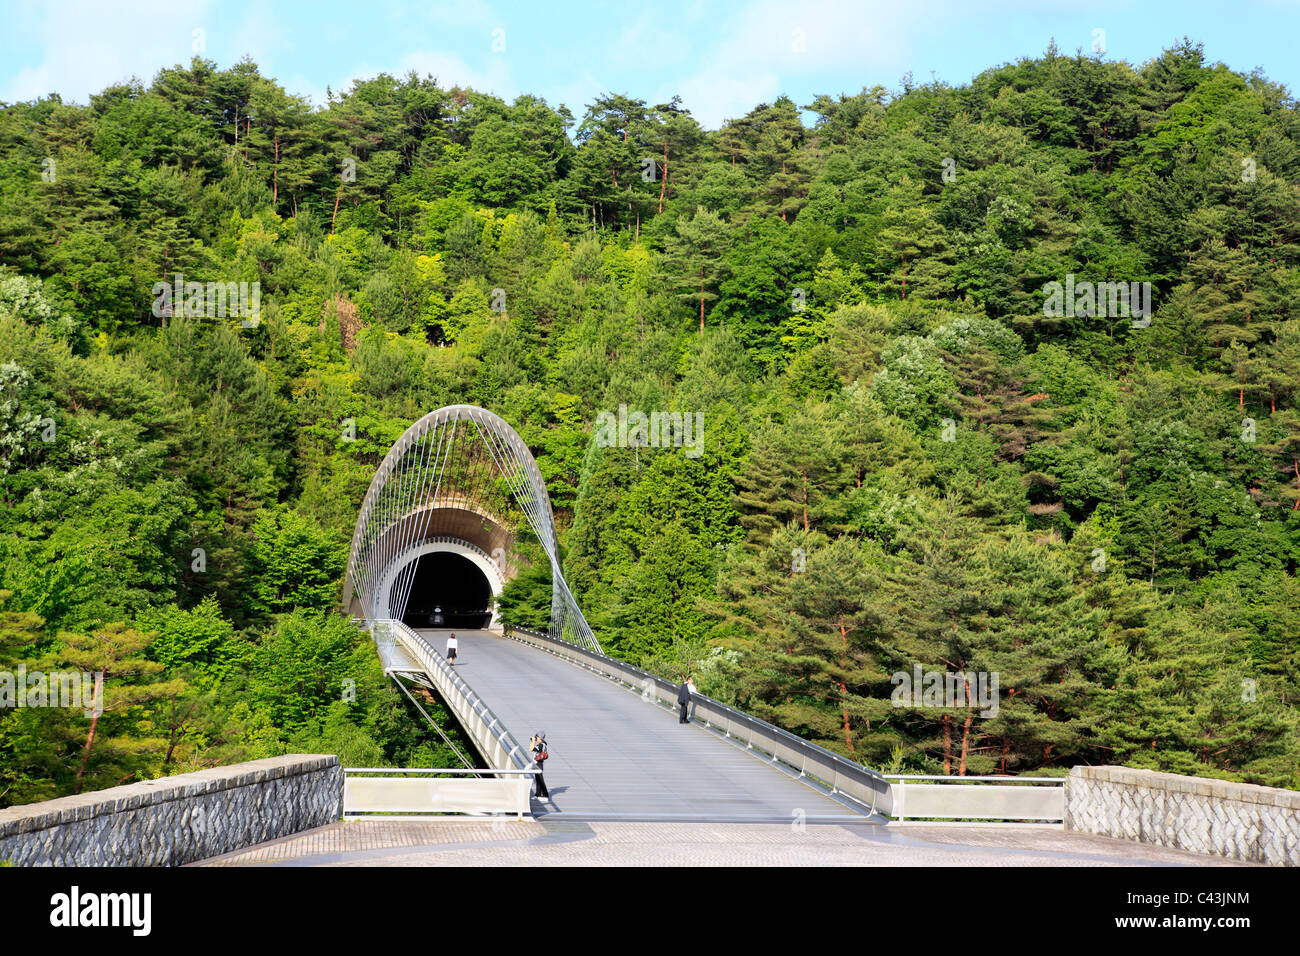 Miho Museum in Koka - Tours and Activities